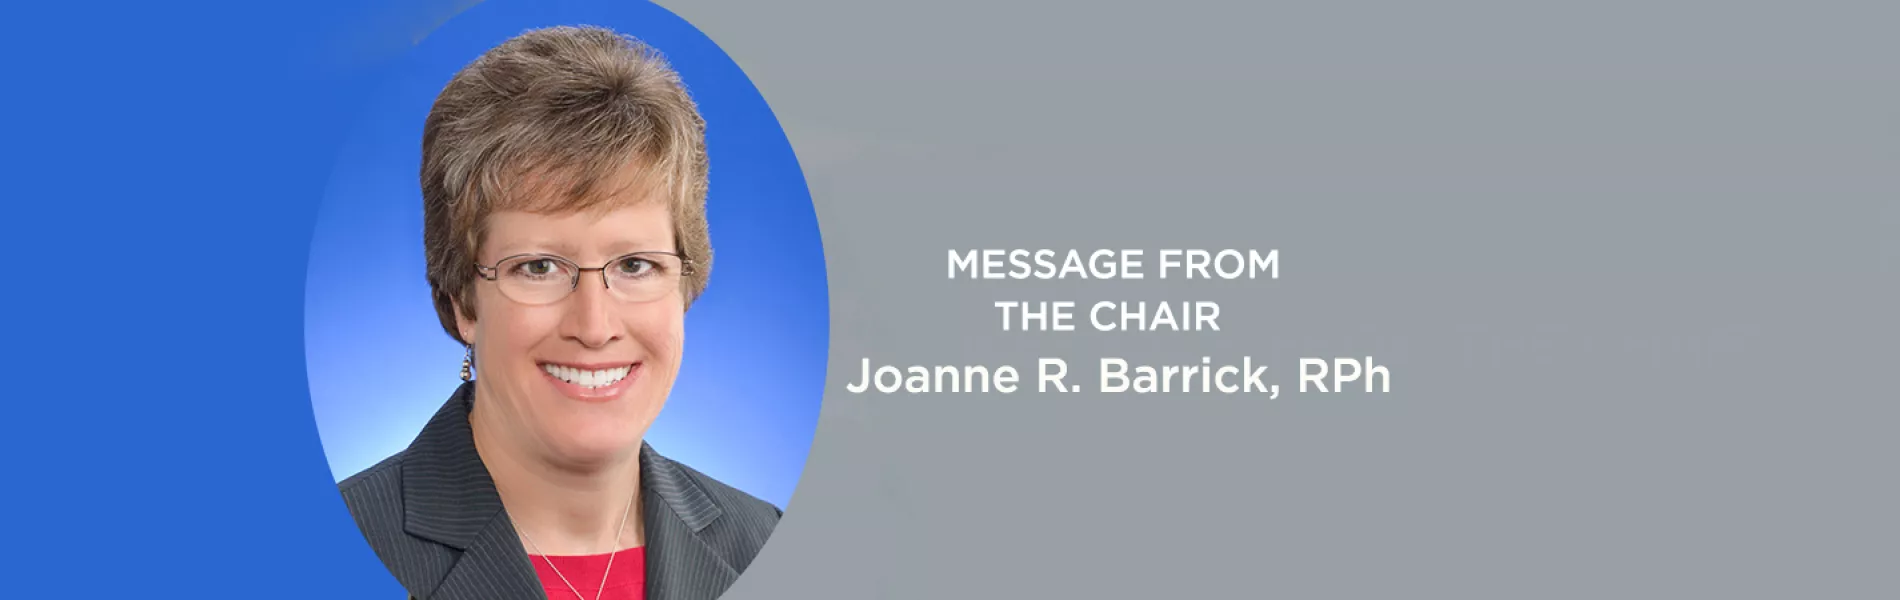 Message from the Chair